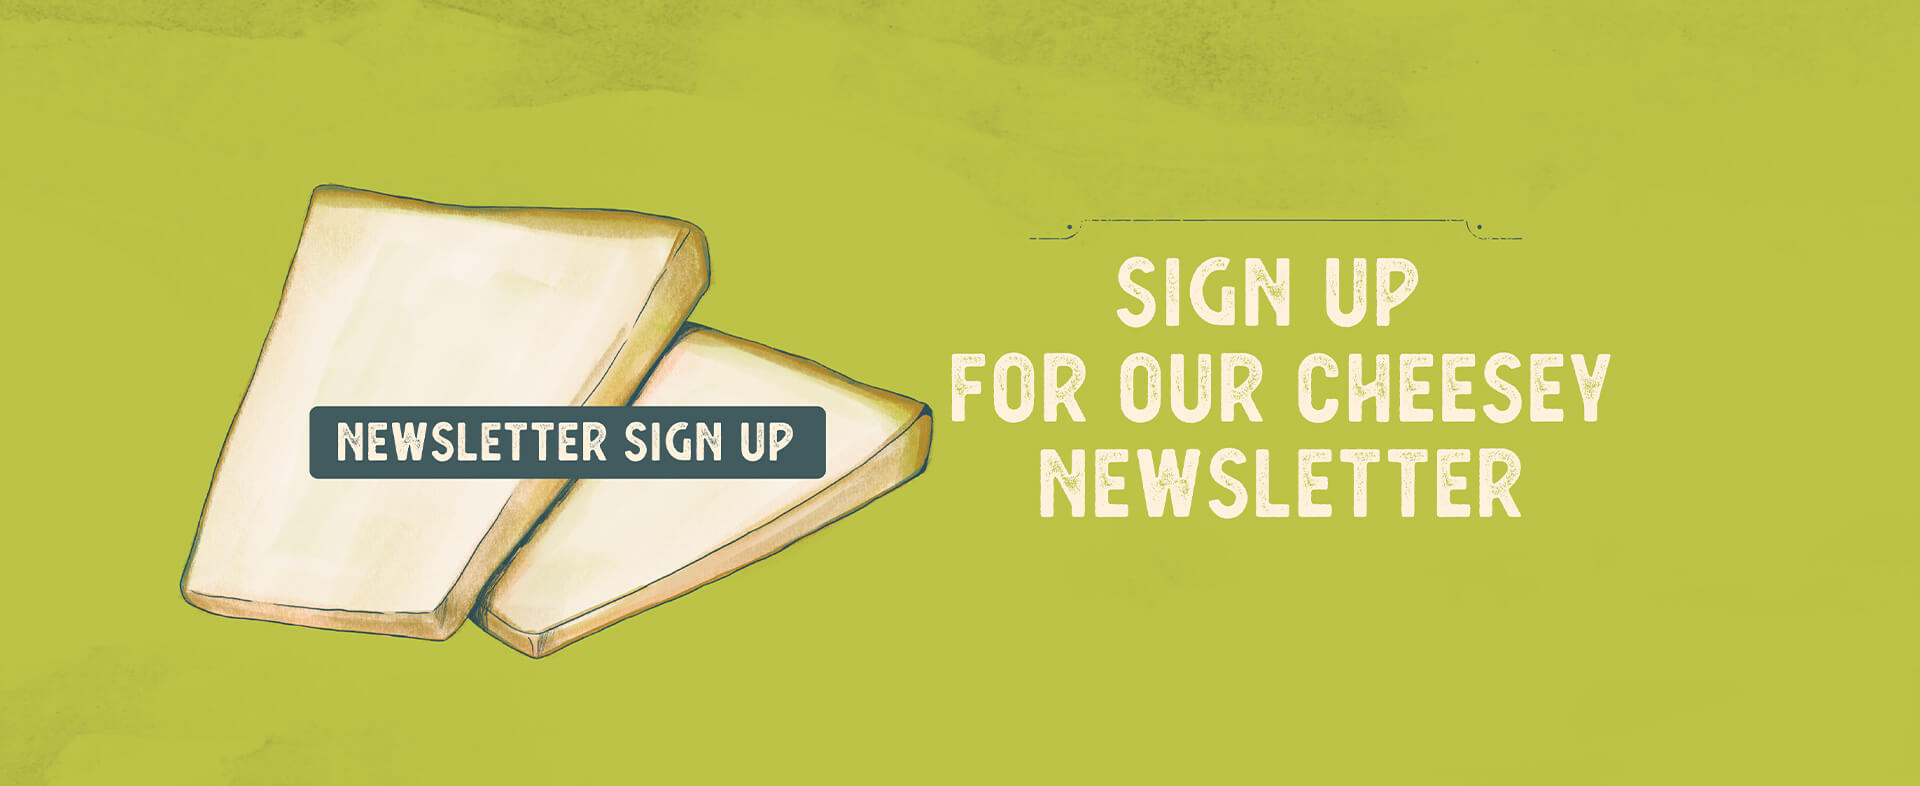 Sign up for our cheesy newsletter.  Newsletter Sign Up.